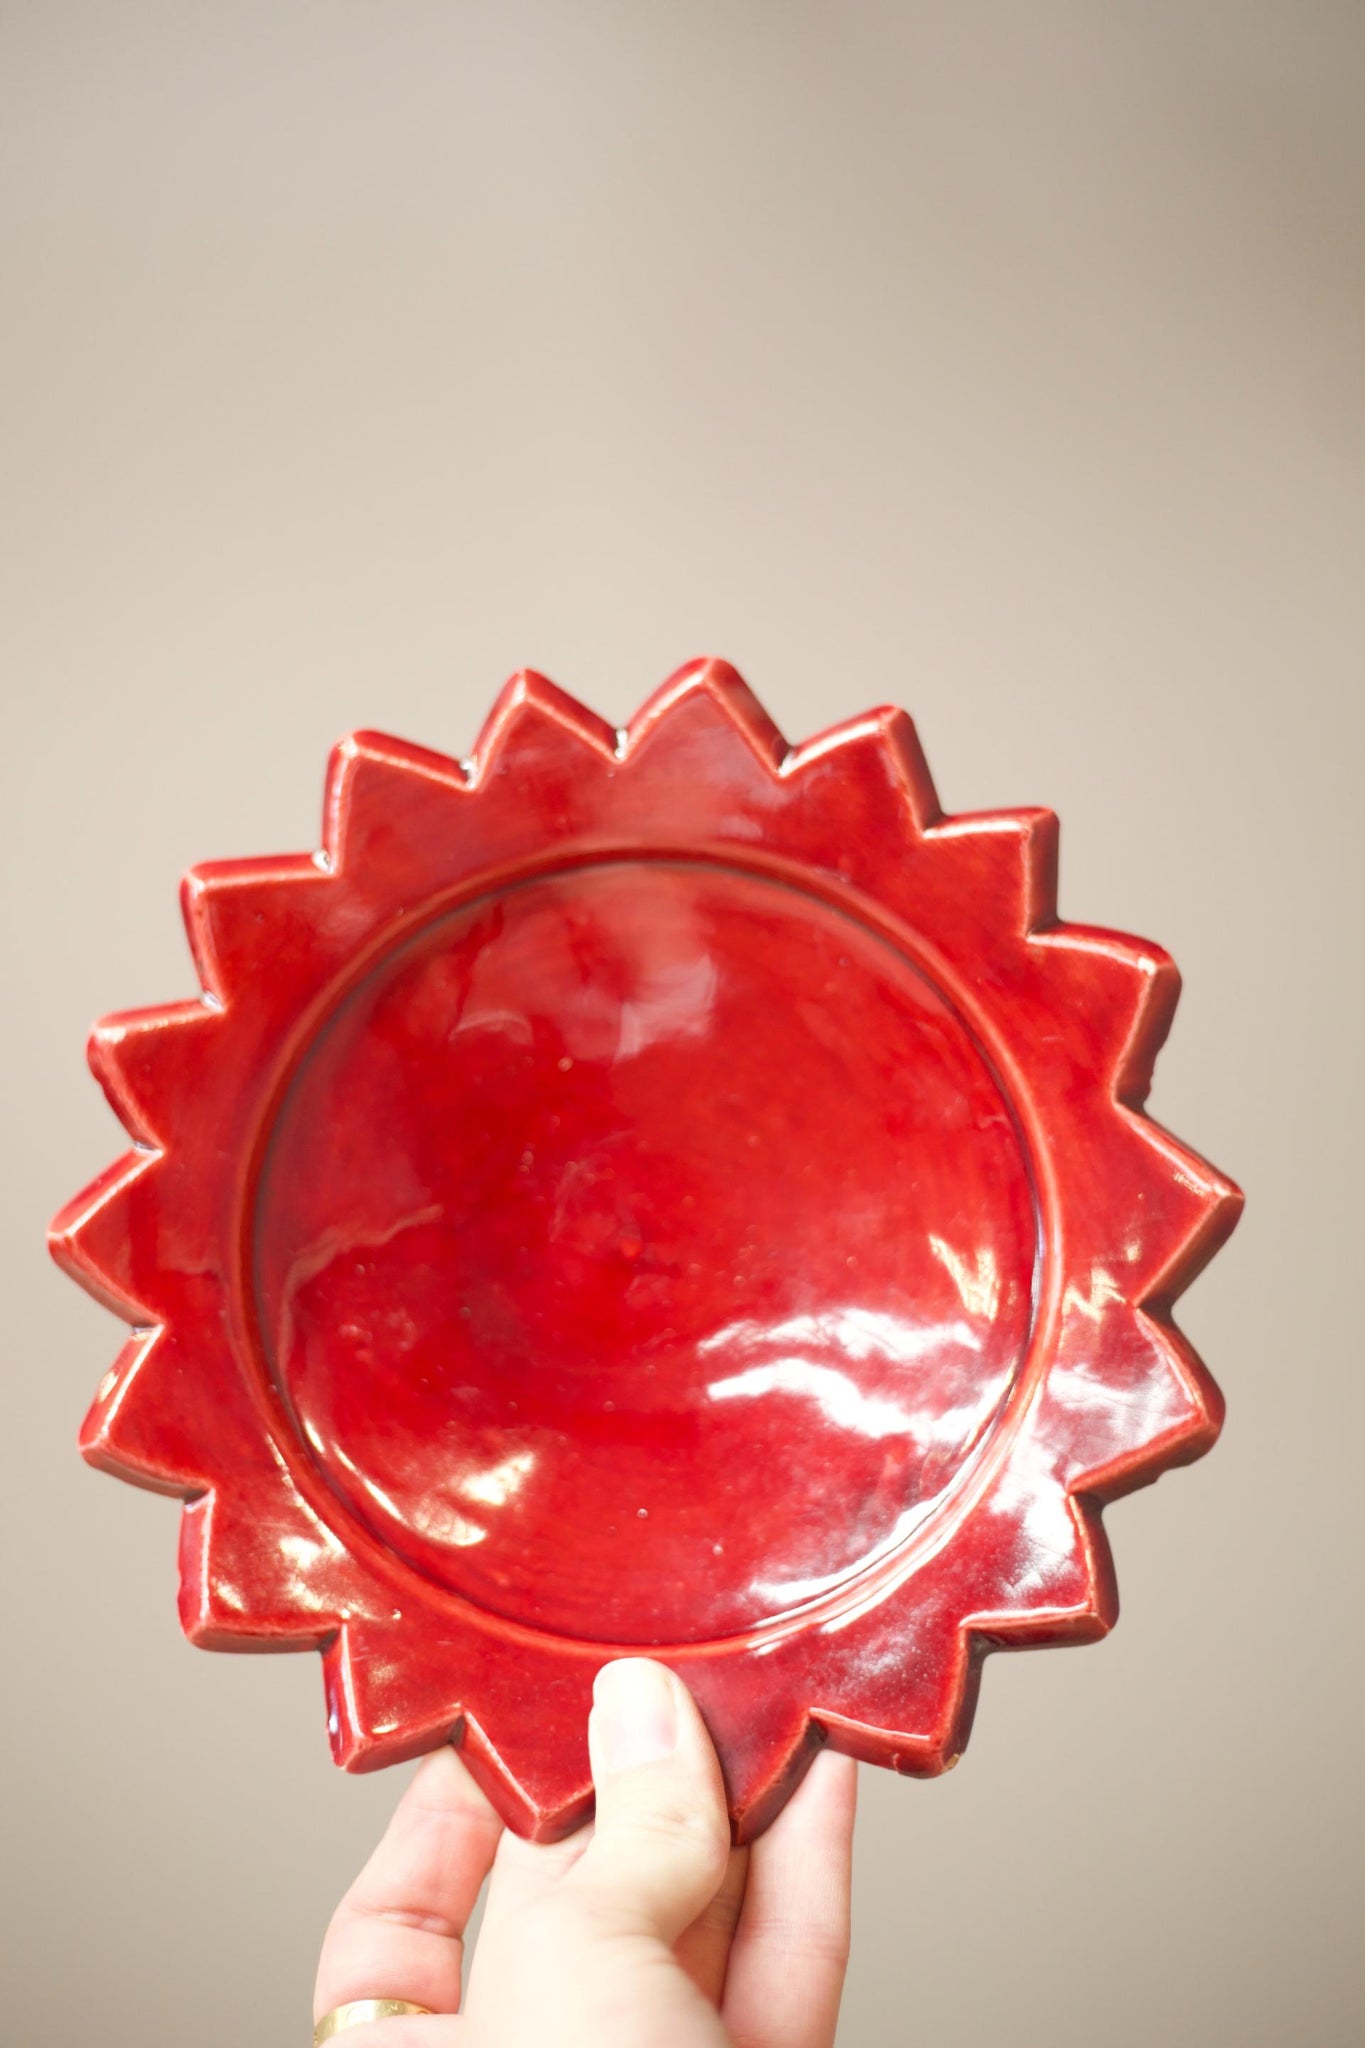 Set of 3 early 20th century starburst pottery plates - Red